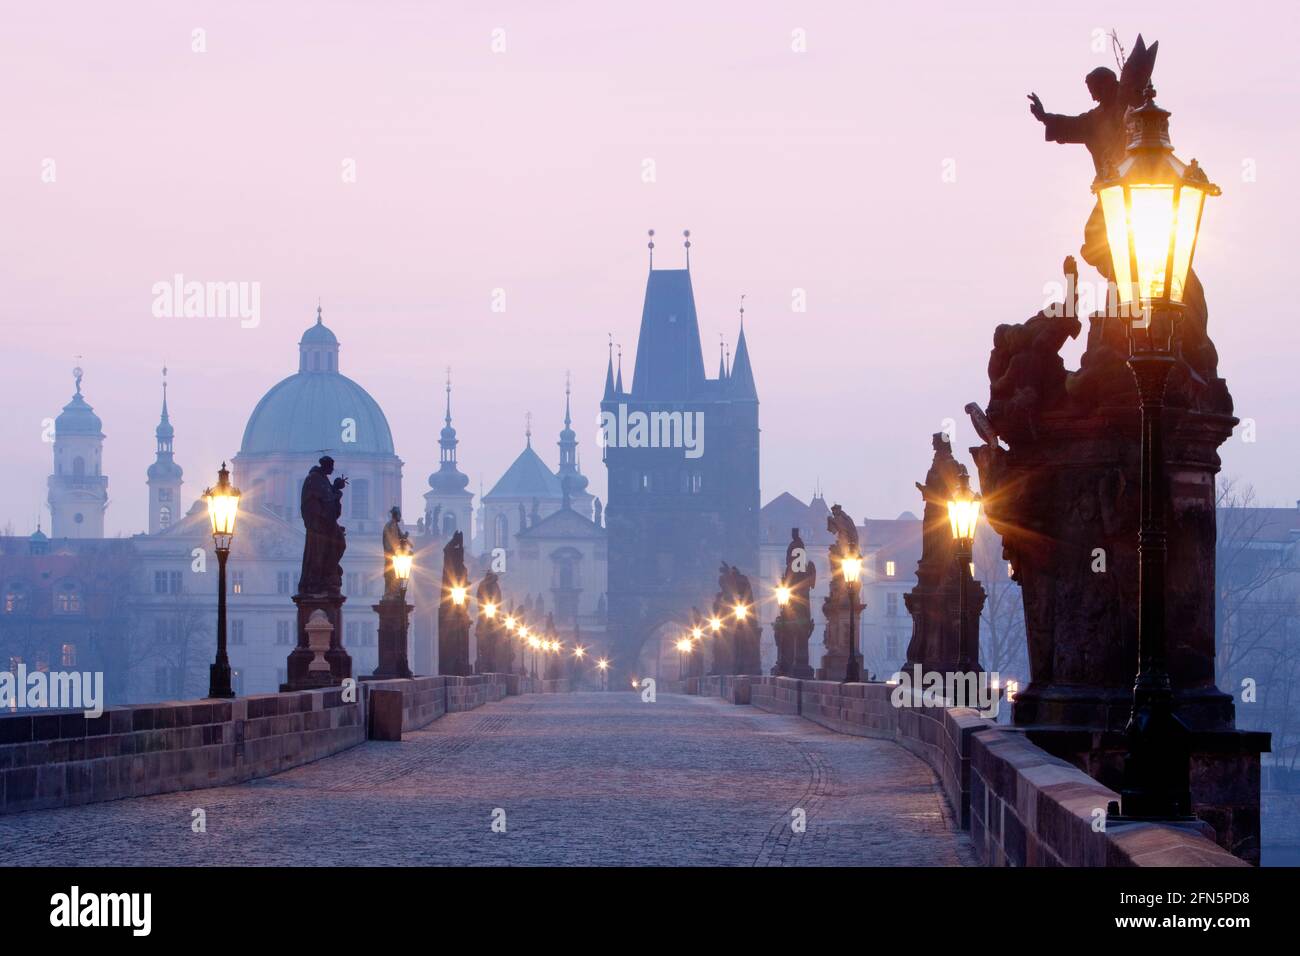 Prague, Czechia - Charles bridge and spires of the Old town at dawn. Stock Photo